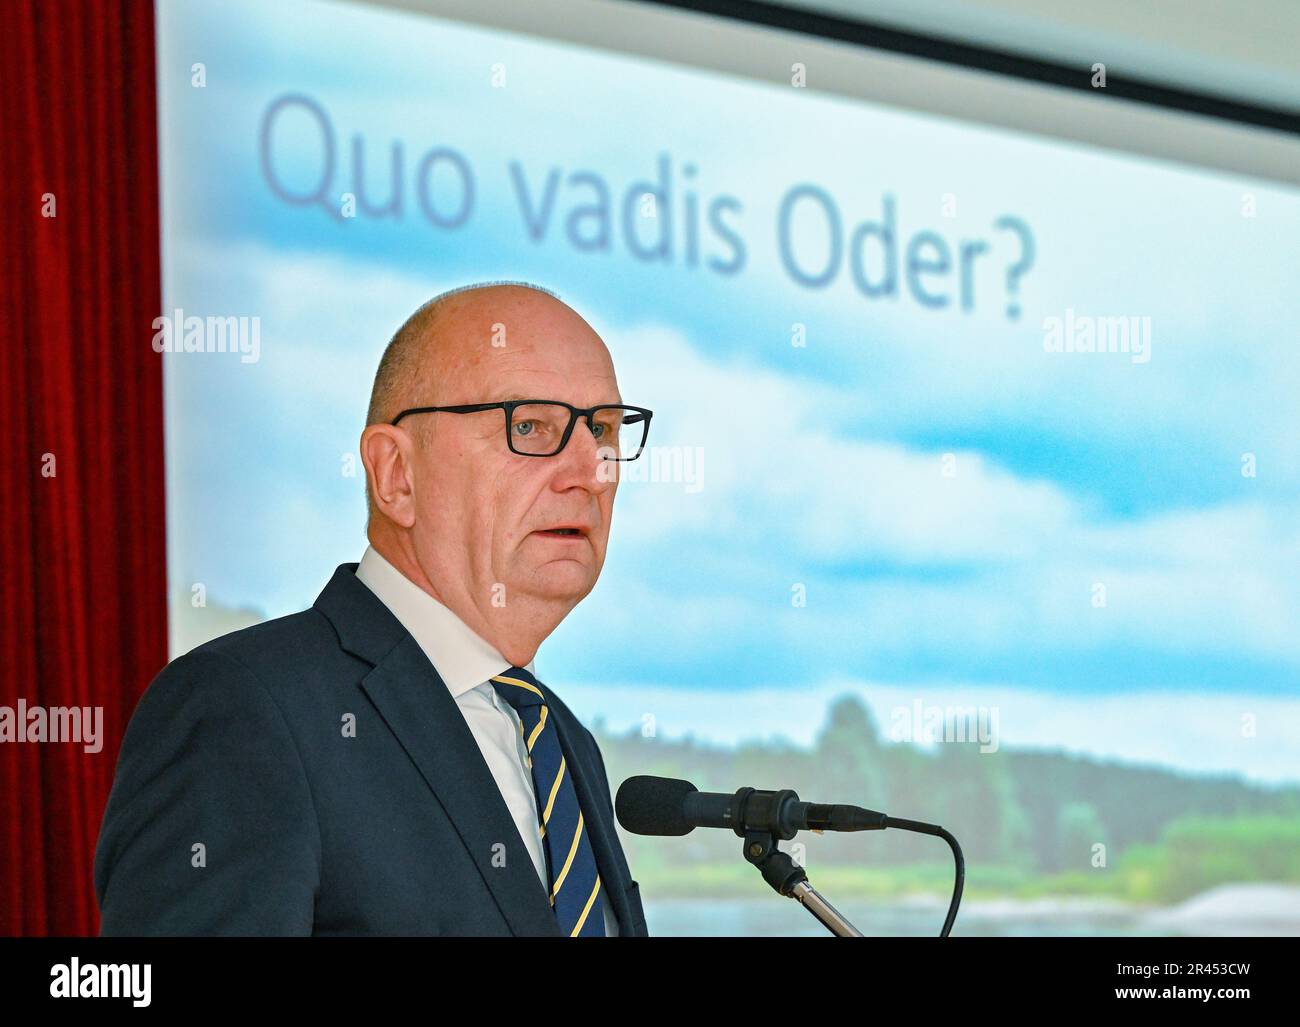 Seelow, Germany. 26th May, 2023. Dietmar Woidke (SPD), Minister President of the State of Brandenburg, speaks at the Oder Conference 'Quo vadis Oder?' on the German-Polish Oder River. The environmental disaster on the Oder River in the summer of 2022 continues to preoccupy many politicians, scientists and fishermen in Germany and Poland. Credit: Patrick Pleul/dpa/Alamy Live News Stock Photo